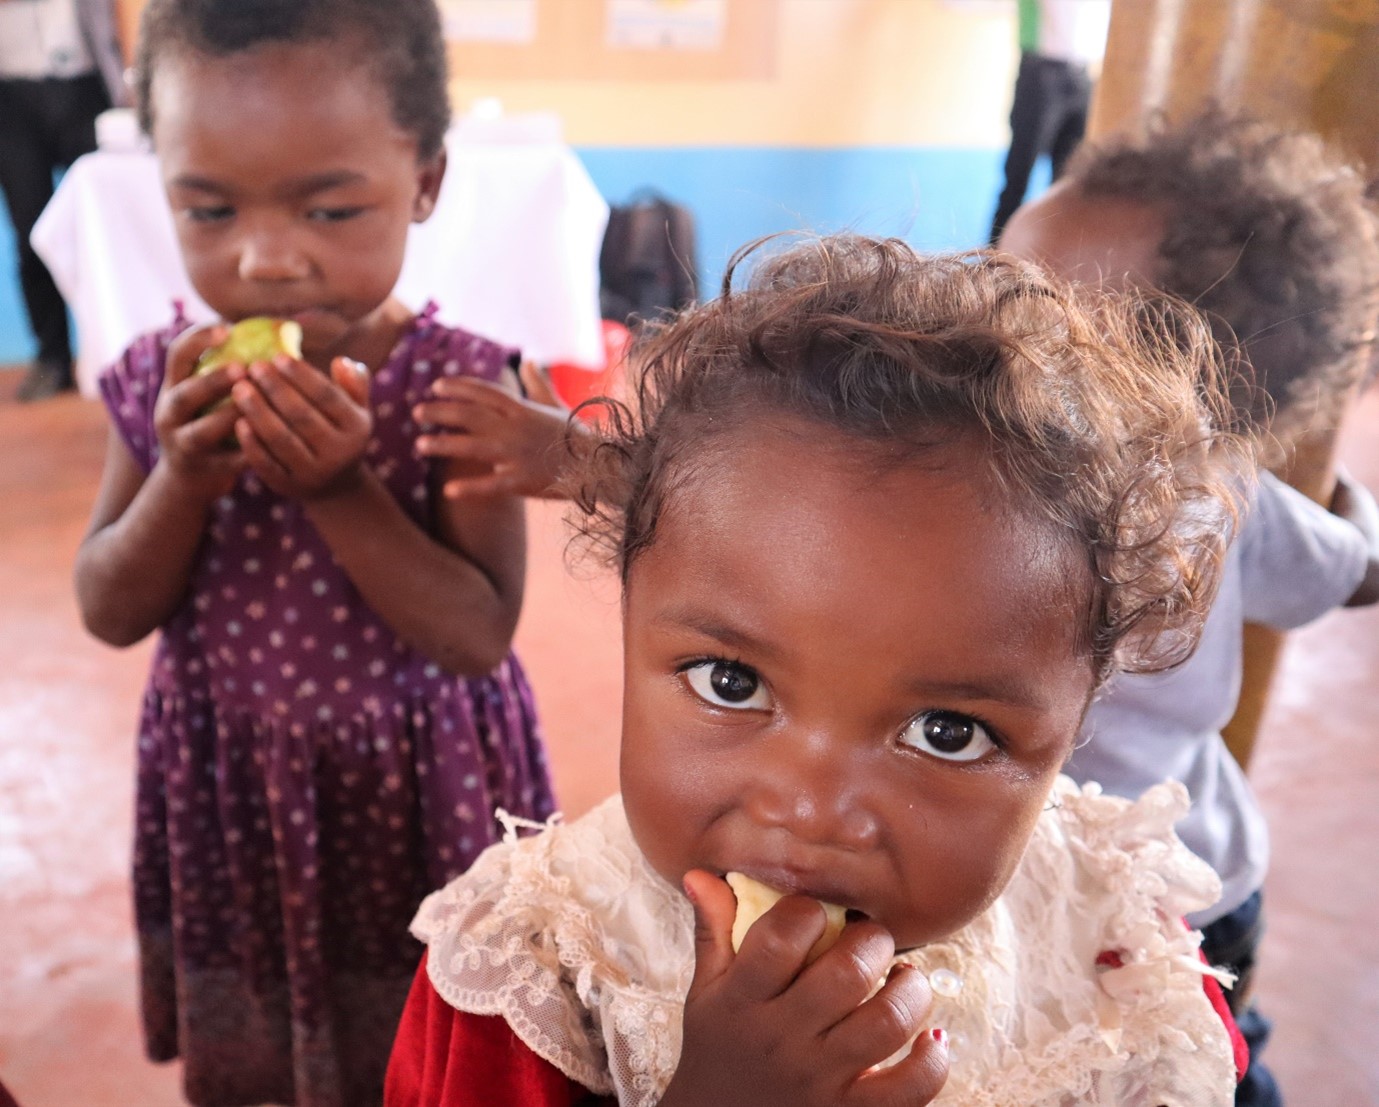 The Power of Nutrition with Palladium Impact Capital Nutrition Ventures: Increasing Domestic and Private Funding Together to Reduce Undernutrition